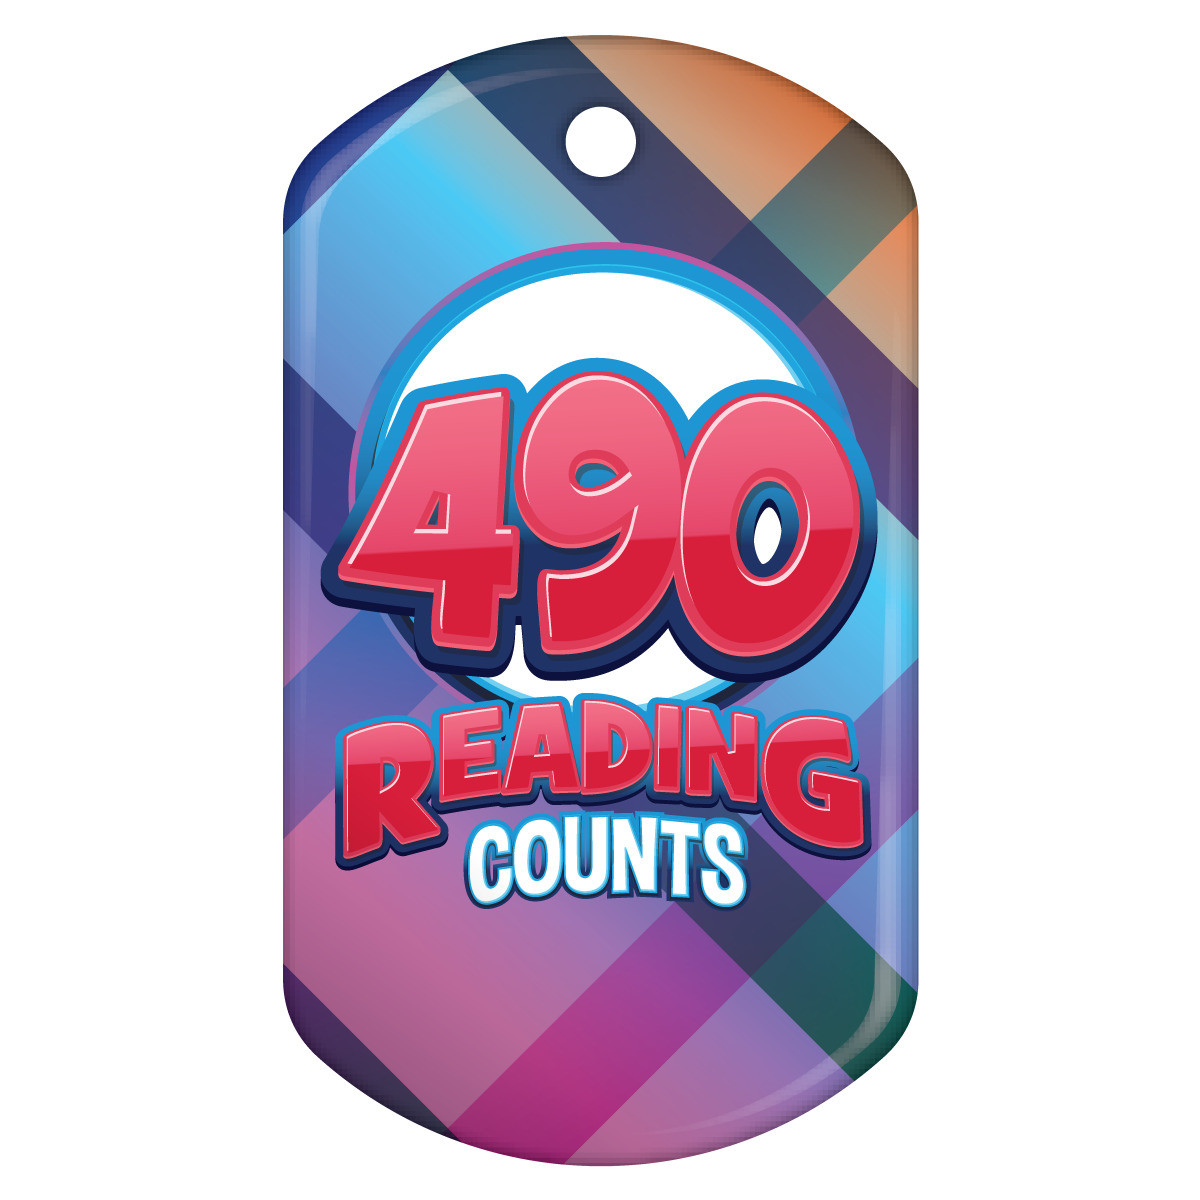 Dog Brag Tag - Reading Counts 490 Points